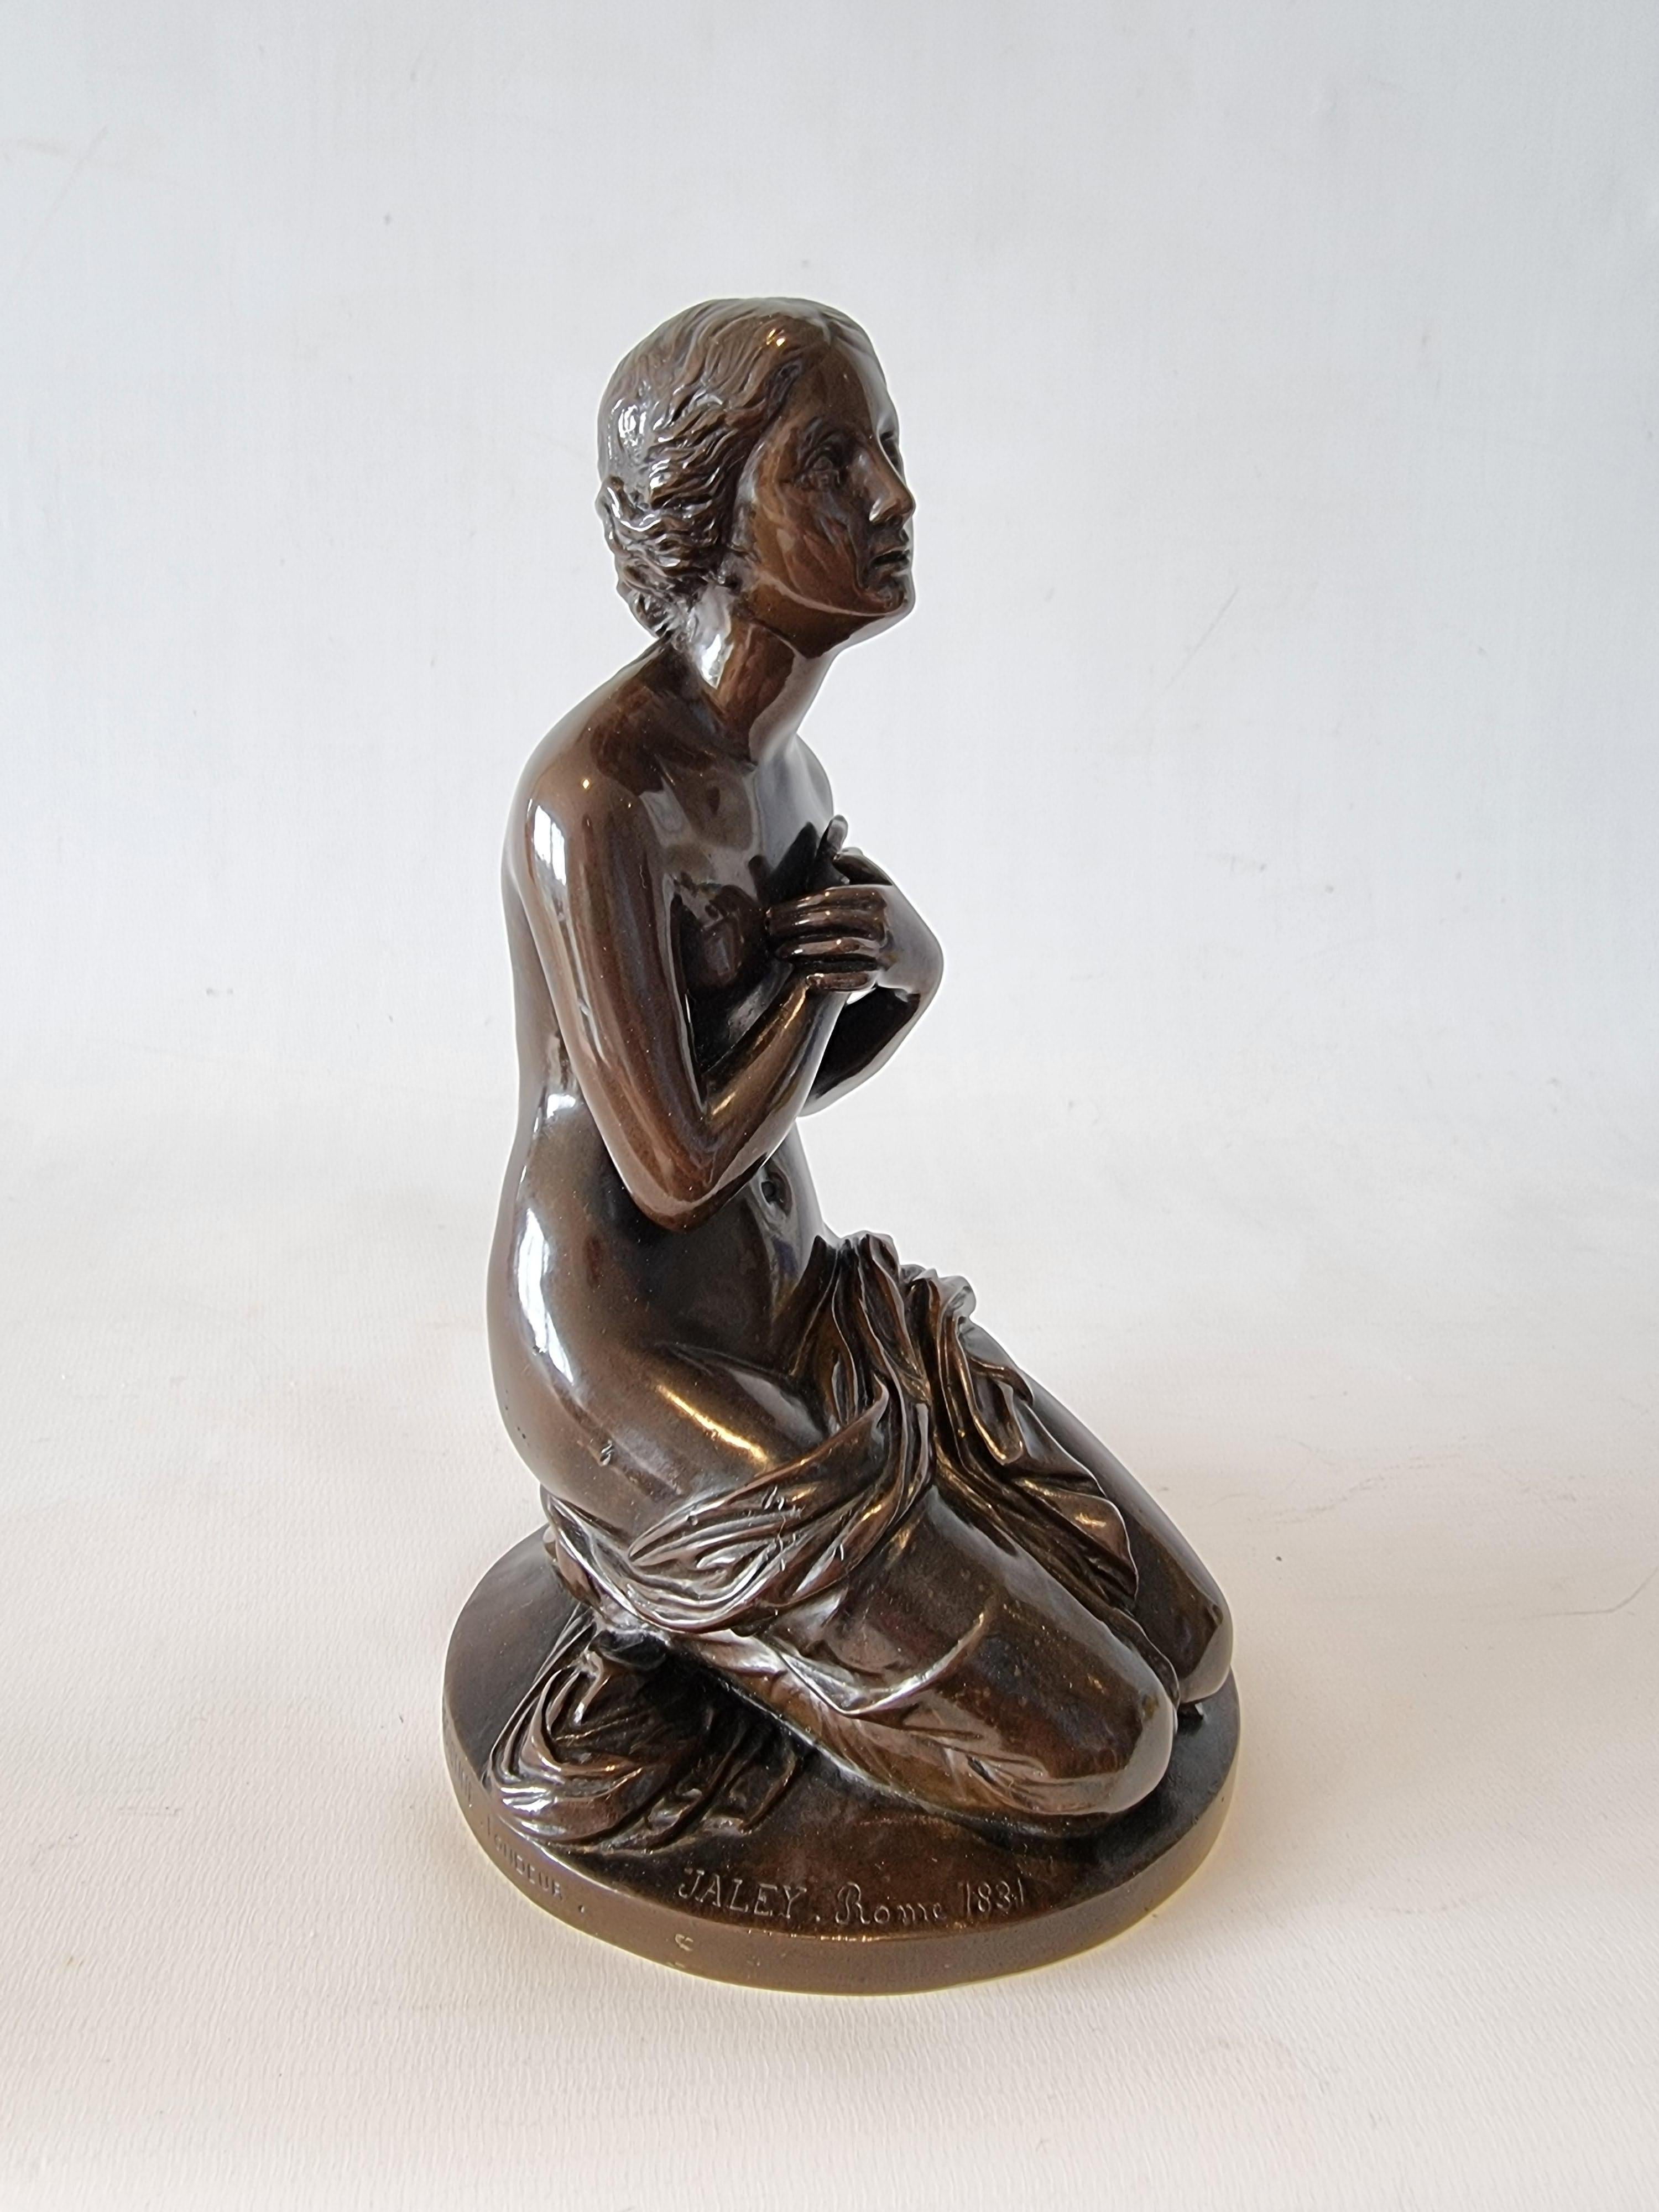 A fine 19th century patinated bronze sculptured titled 'La Priere' or 'the prayer' signed for Jean-Louis Nicholas Jaley, and dated 1831. It is also fully signed by the famous fondeur barbedienne on the moulding of the base 